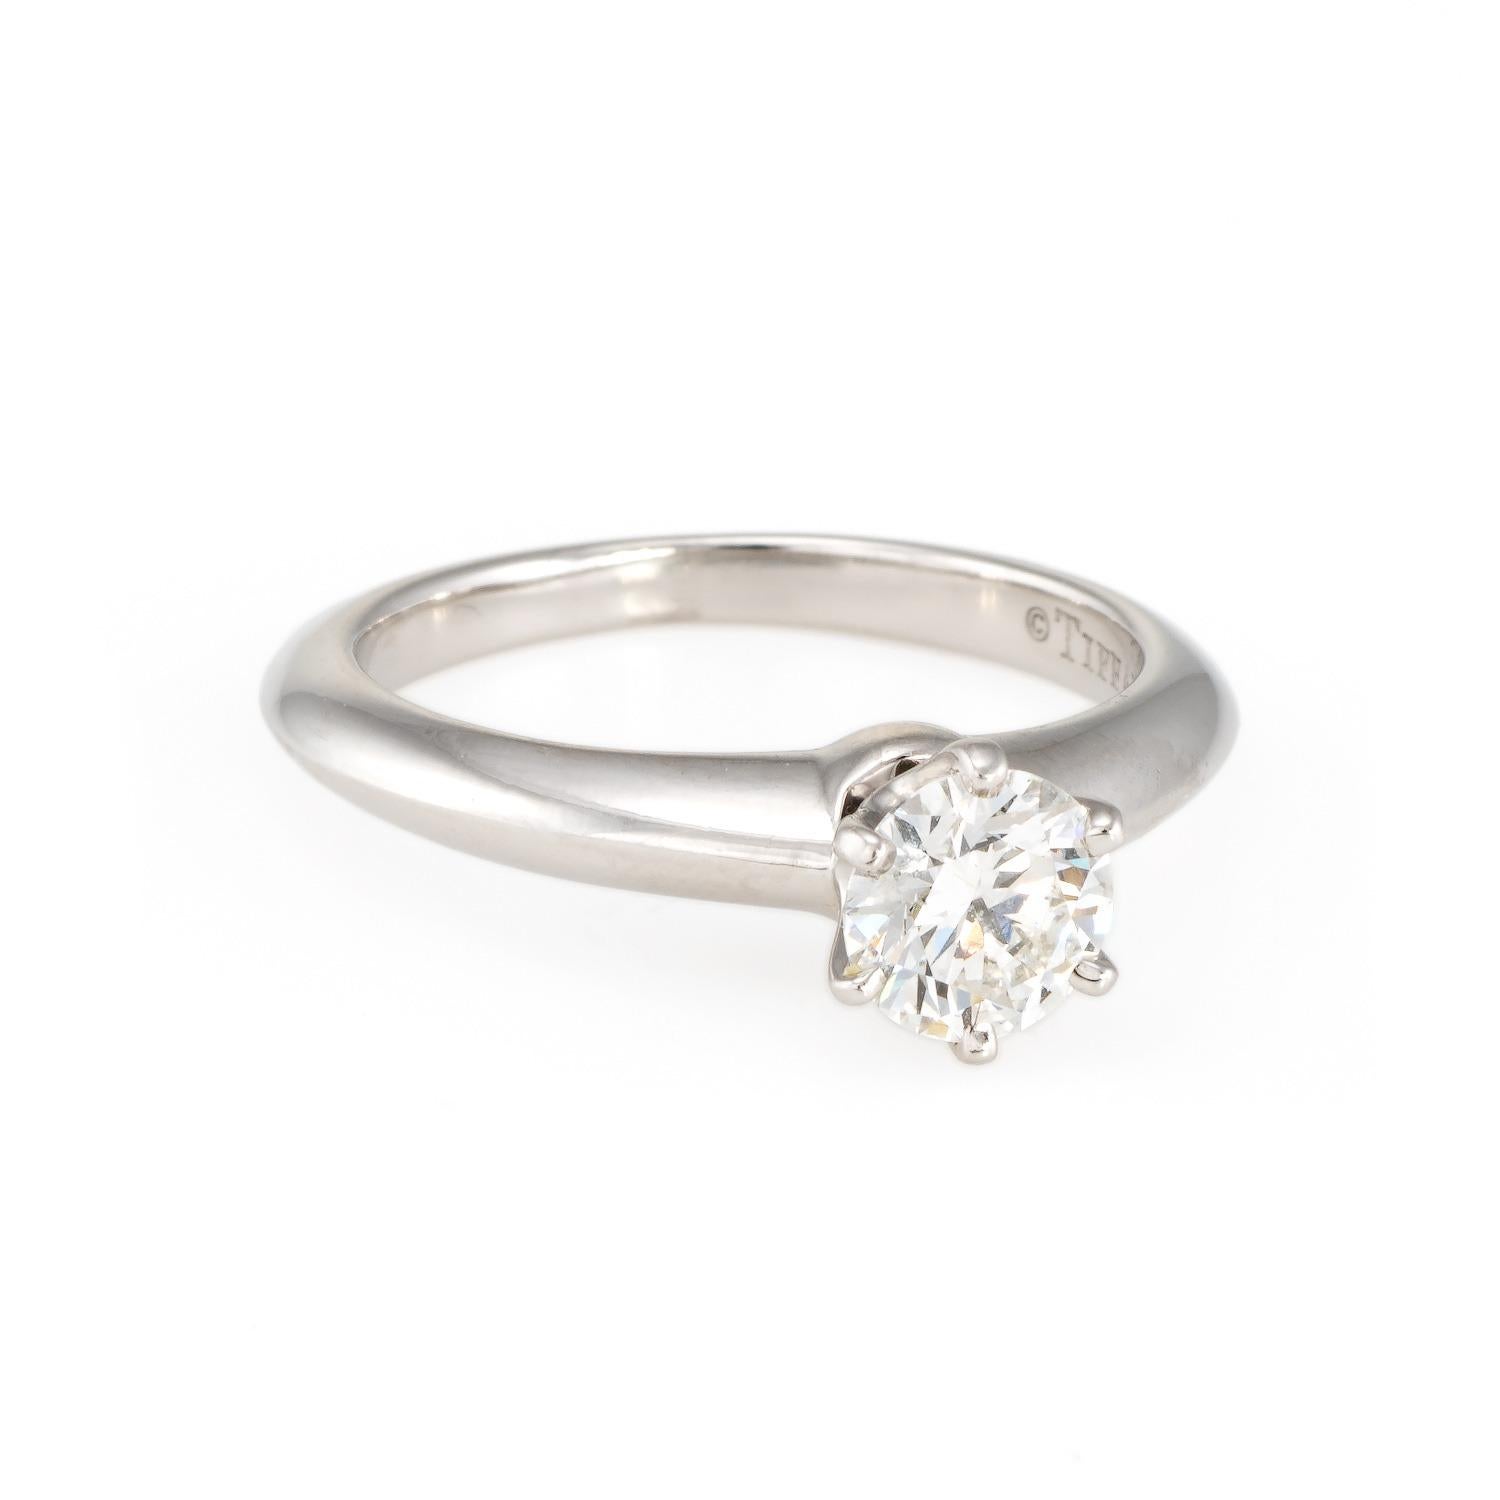 Elegant pre owned Tiffany & Co diamond solitaire engagement ring, crafted in 950 platinum. 

Round brilliant cut diamond measures 5.56 - 5.59 x 3.36mm (0.64 carats). The diamond is graded F color and SI1 clarity.

The classic 'Tiffany Setting' ring